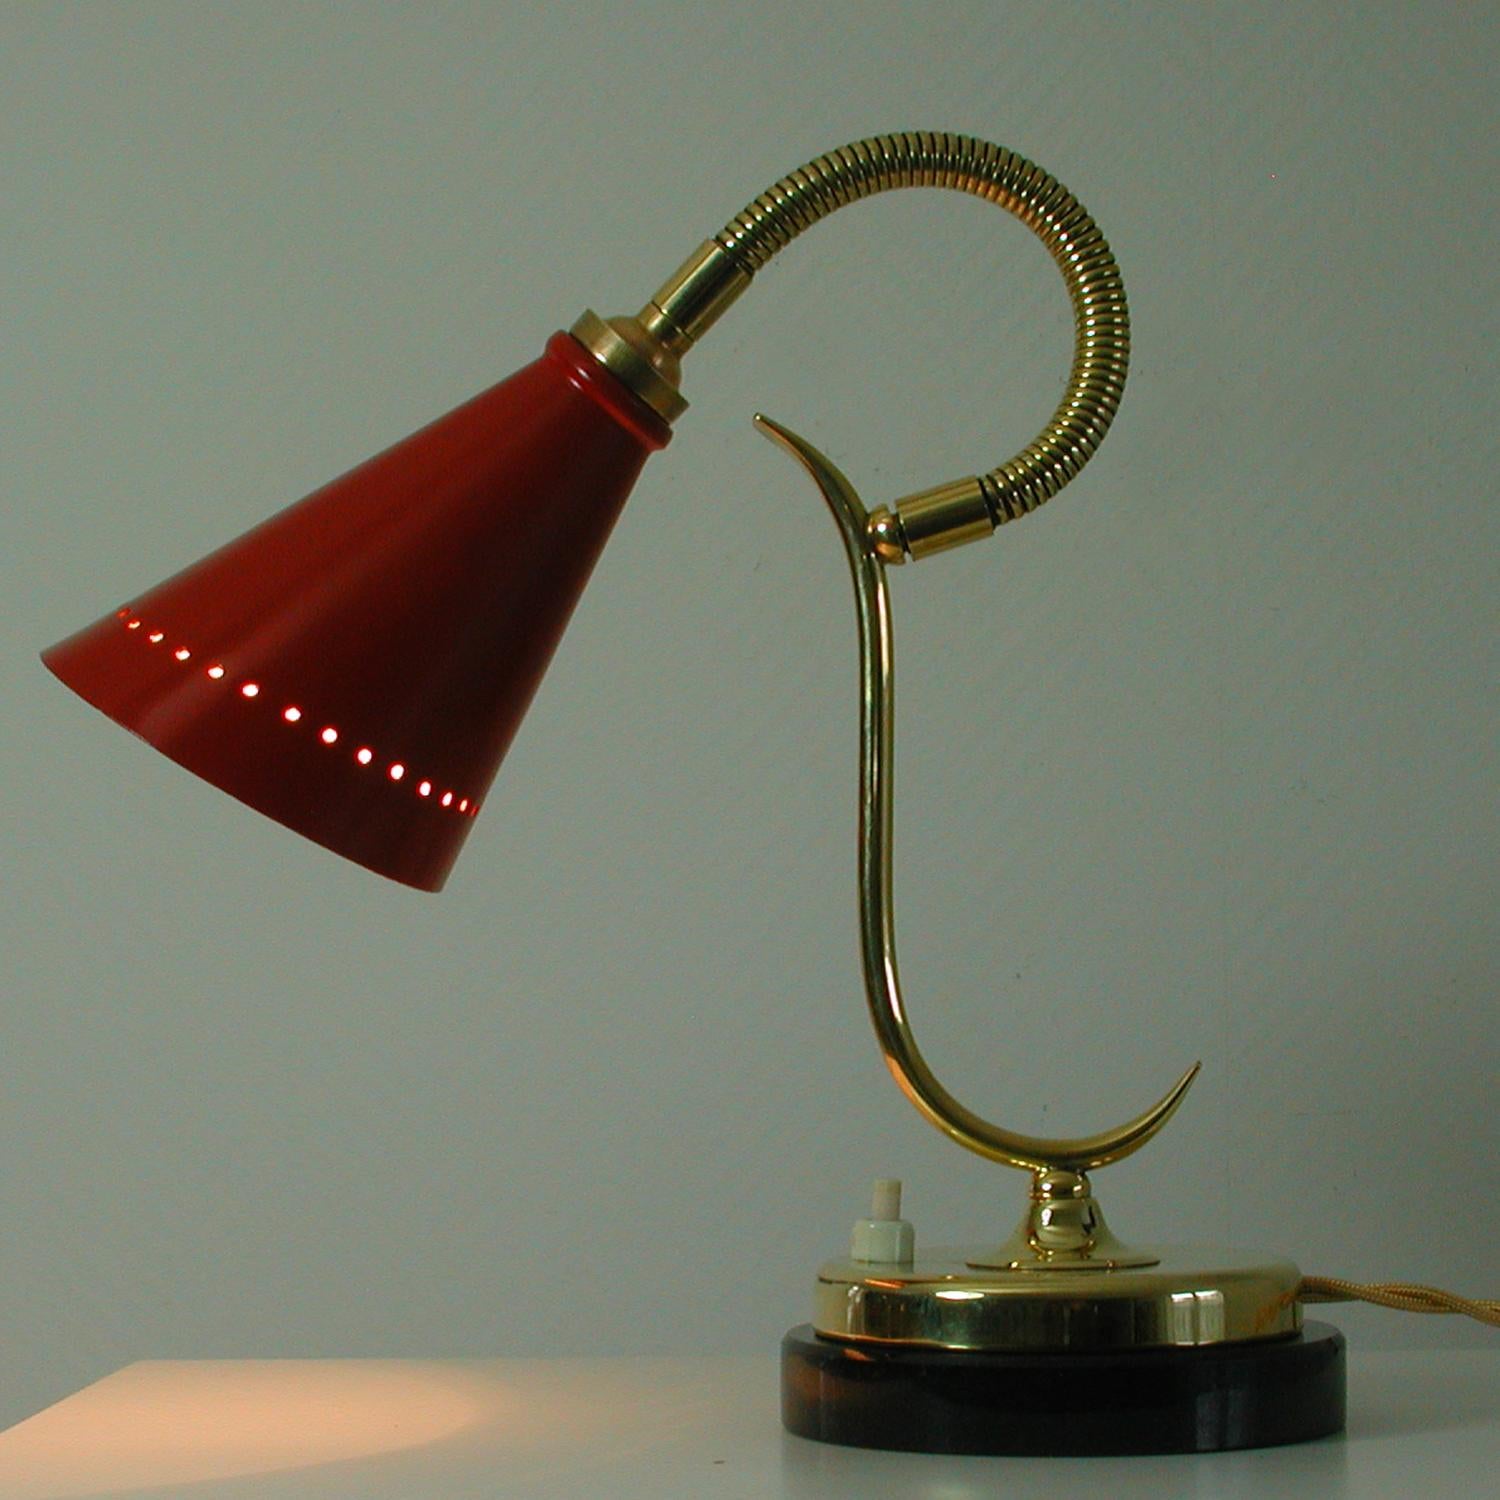 French Midcentury Red Brass and Marble Gooseneck Table Lamp, 1950s For Sale 5